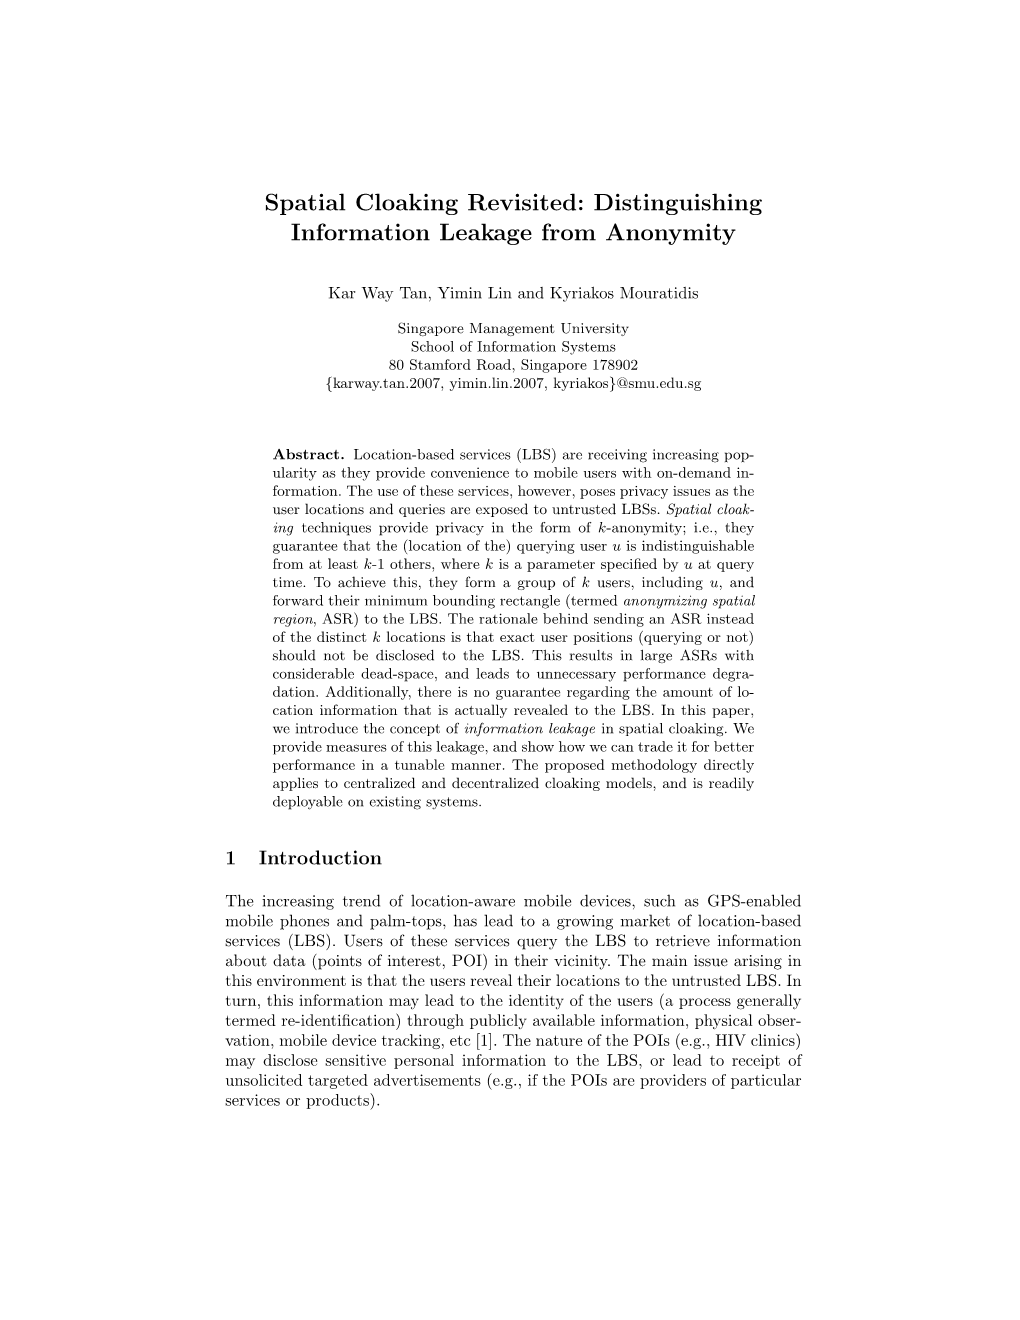 Spatial Cloaking Revisited: Distinguishing Information Leakage from Anonymity